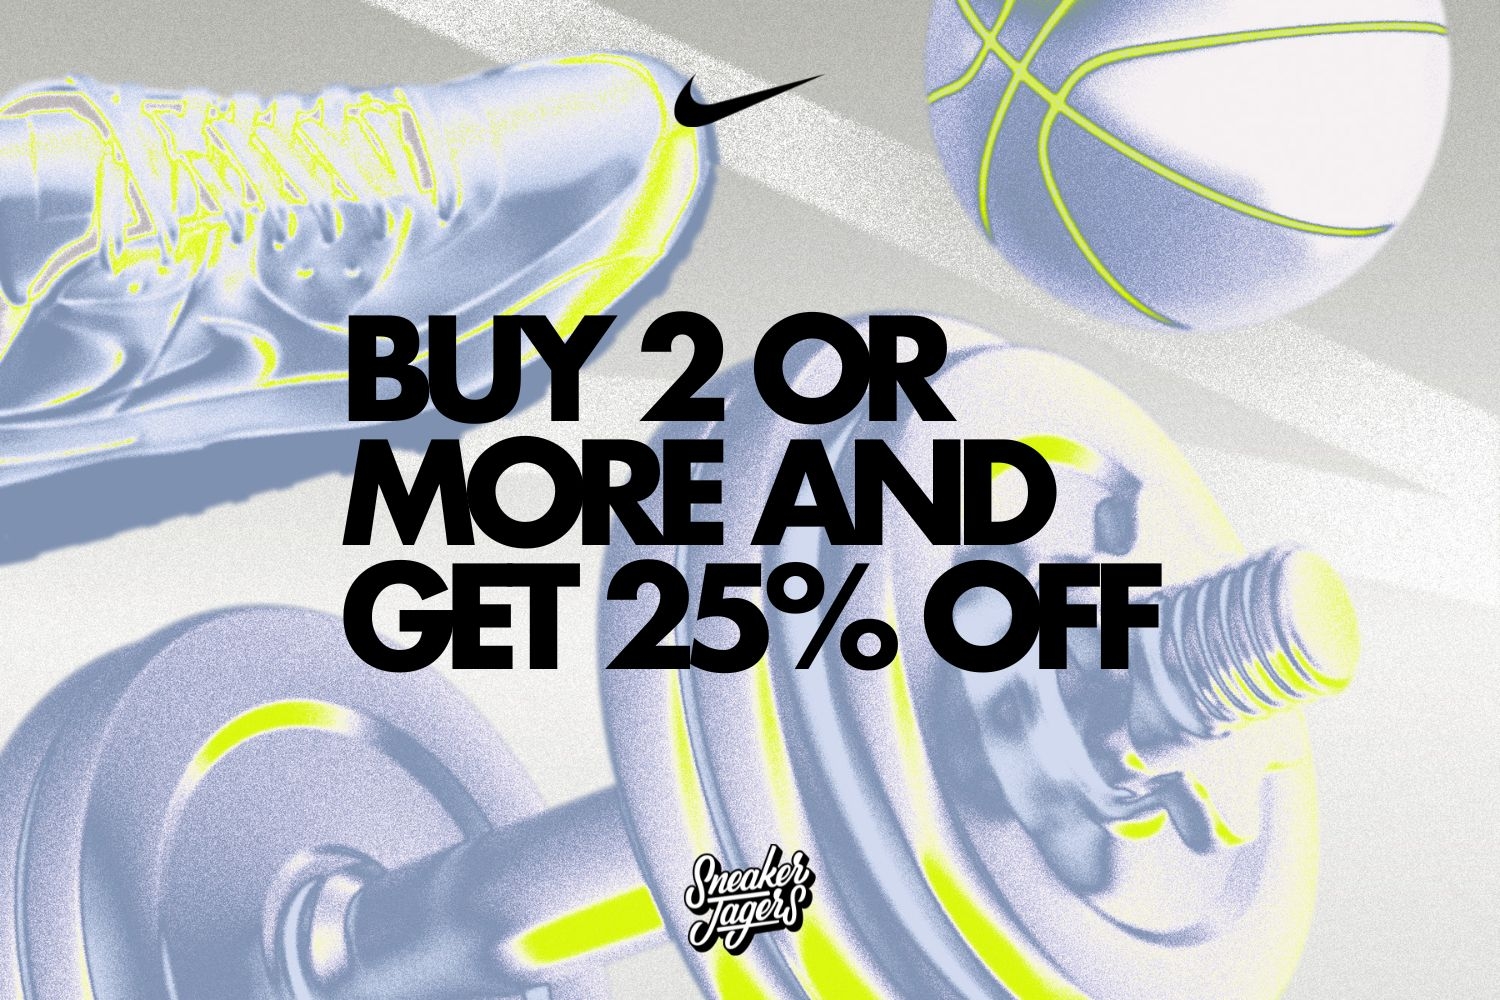 Benefit from 25% discount in the Nike Bundle sale